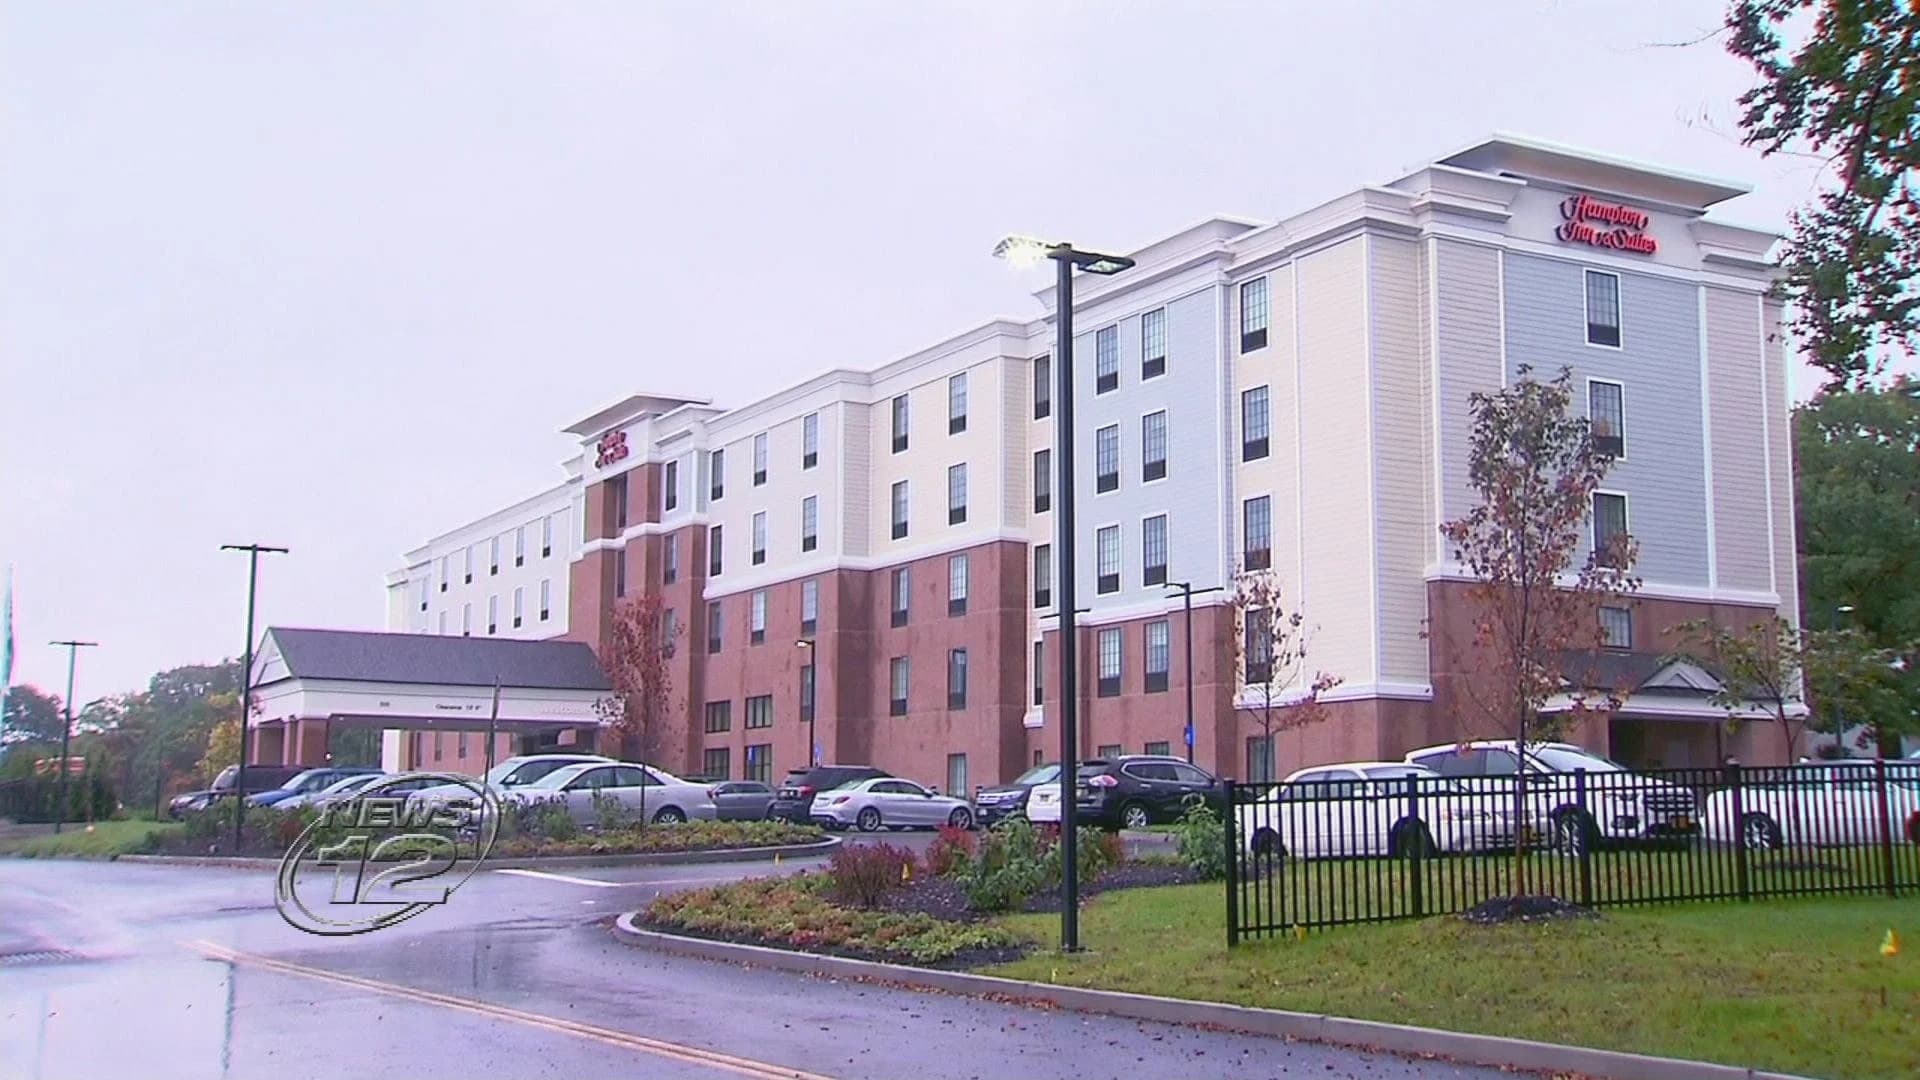 New Hilton hotel opens in Yonkers